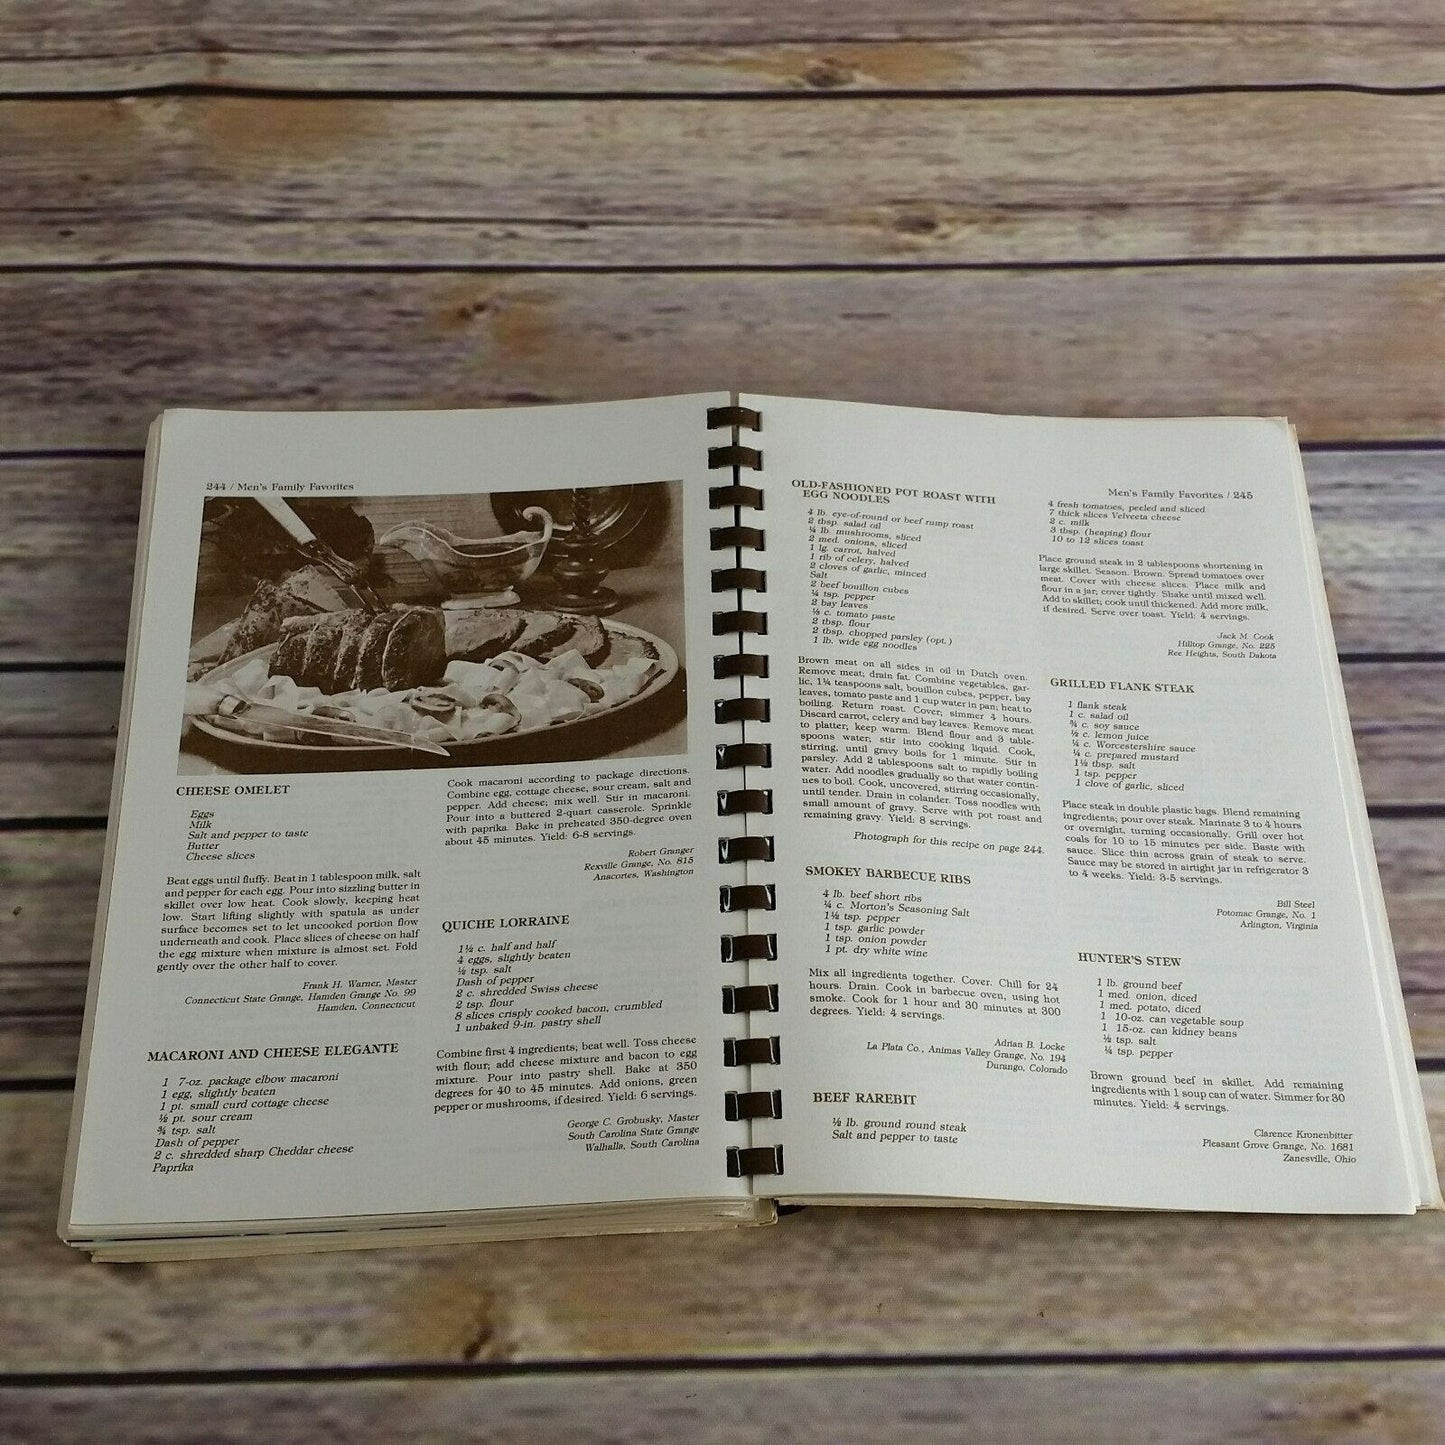 Vintage National Grange Cookbook Family Cookbook from Country Kitchens Recipes Jenny Grobusky Women's Activities Director 1979 Spiral Bound